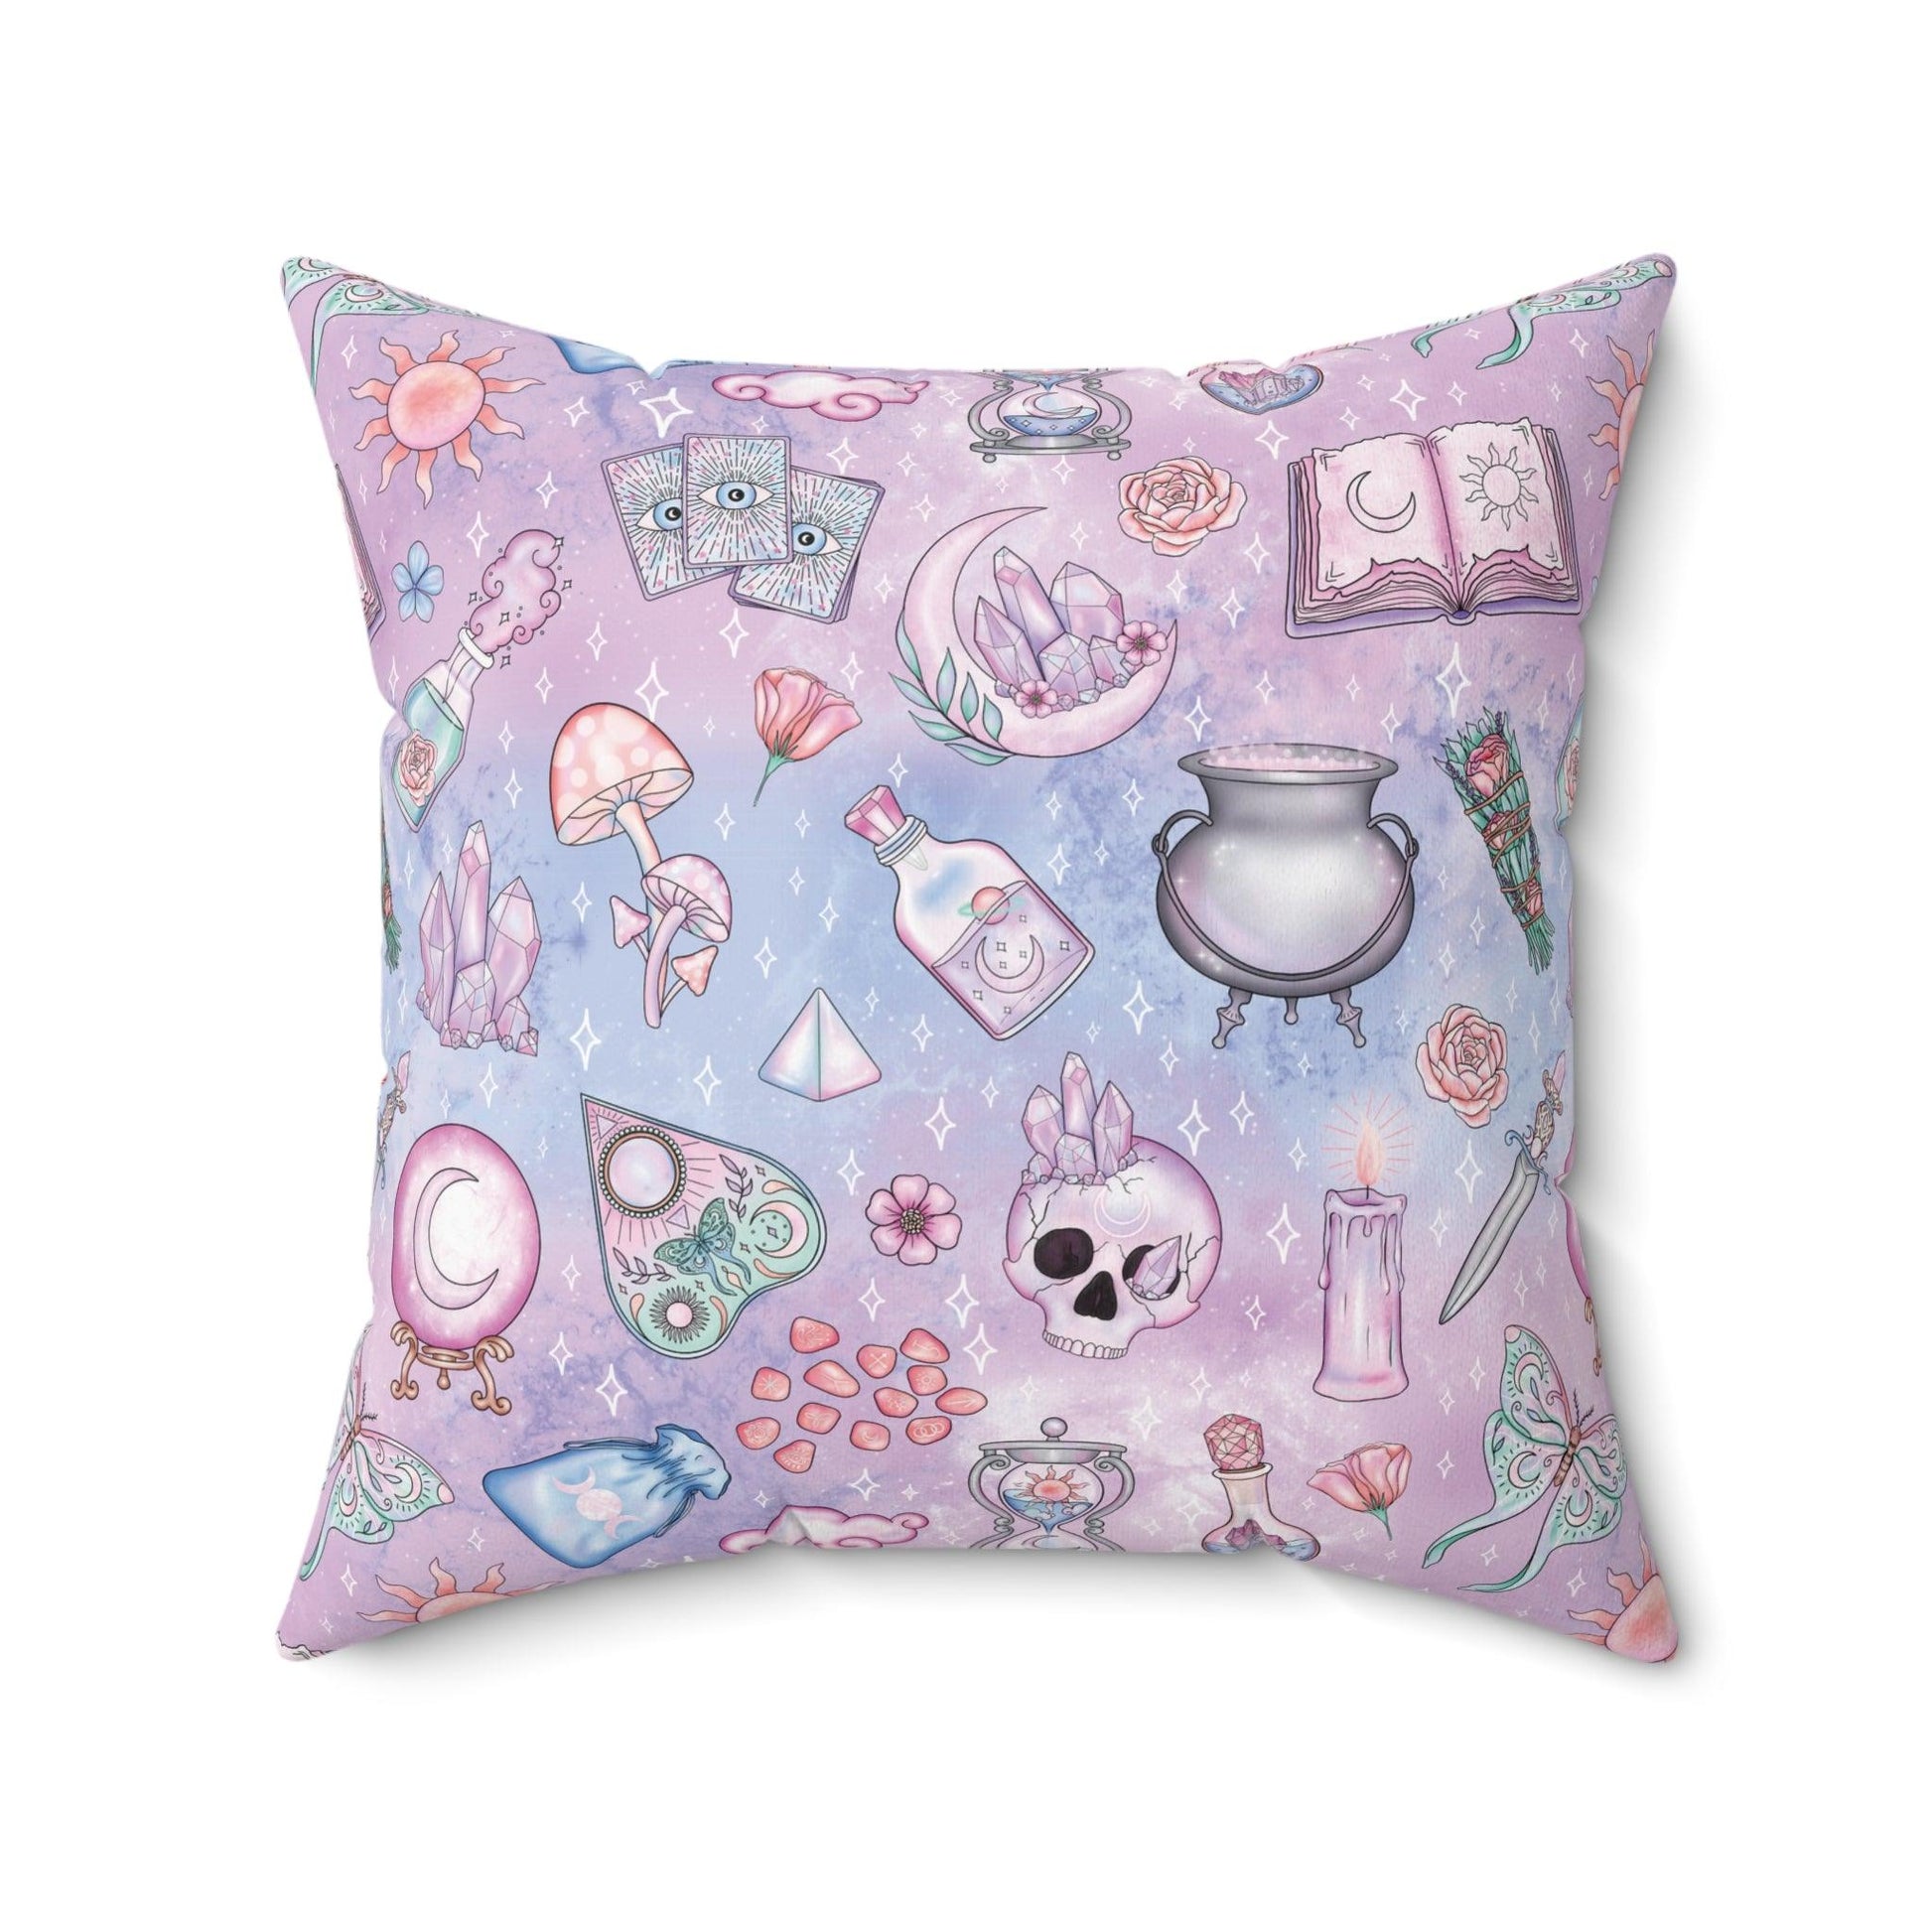 Kawaii Pastel Goth Witchy Whimsigoth Blue & Pink Accent Pillow | lovevisionkarma.com